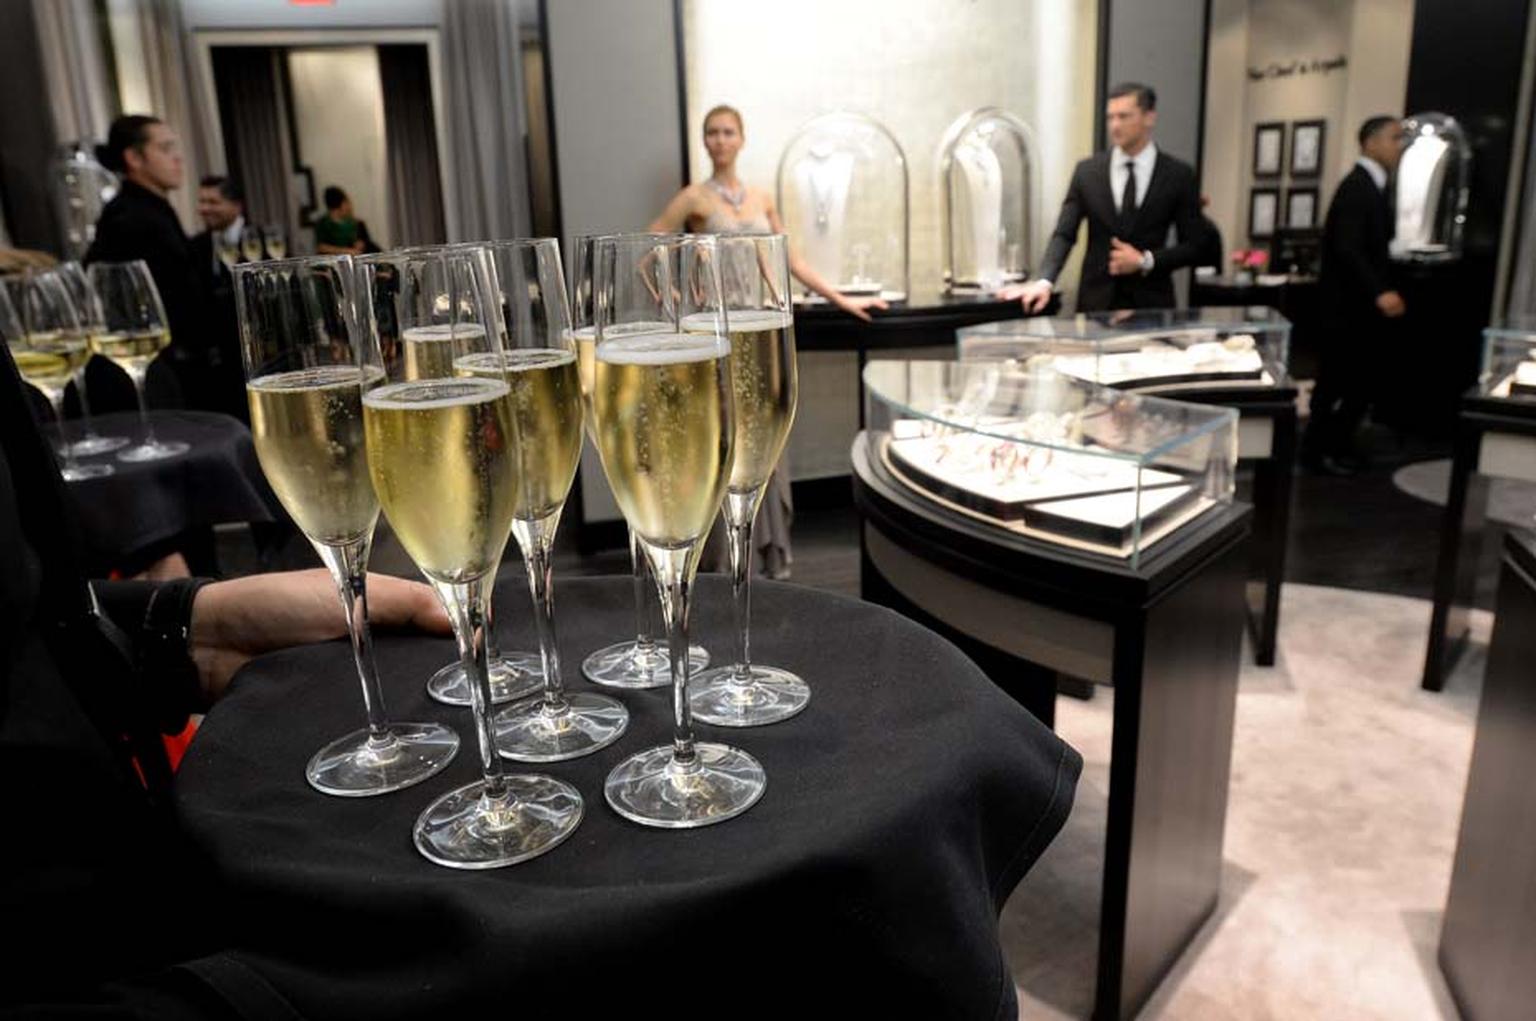 Guests arrived at the newly expanded and redesigned Van Cleef & Arpels boutique to a cocktail reception followed by a private dinner